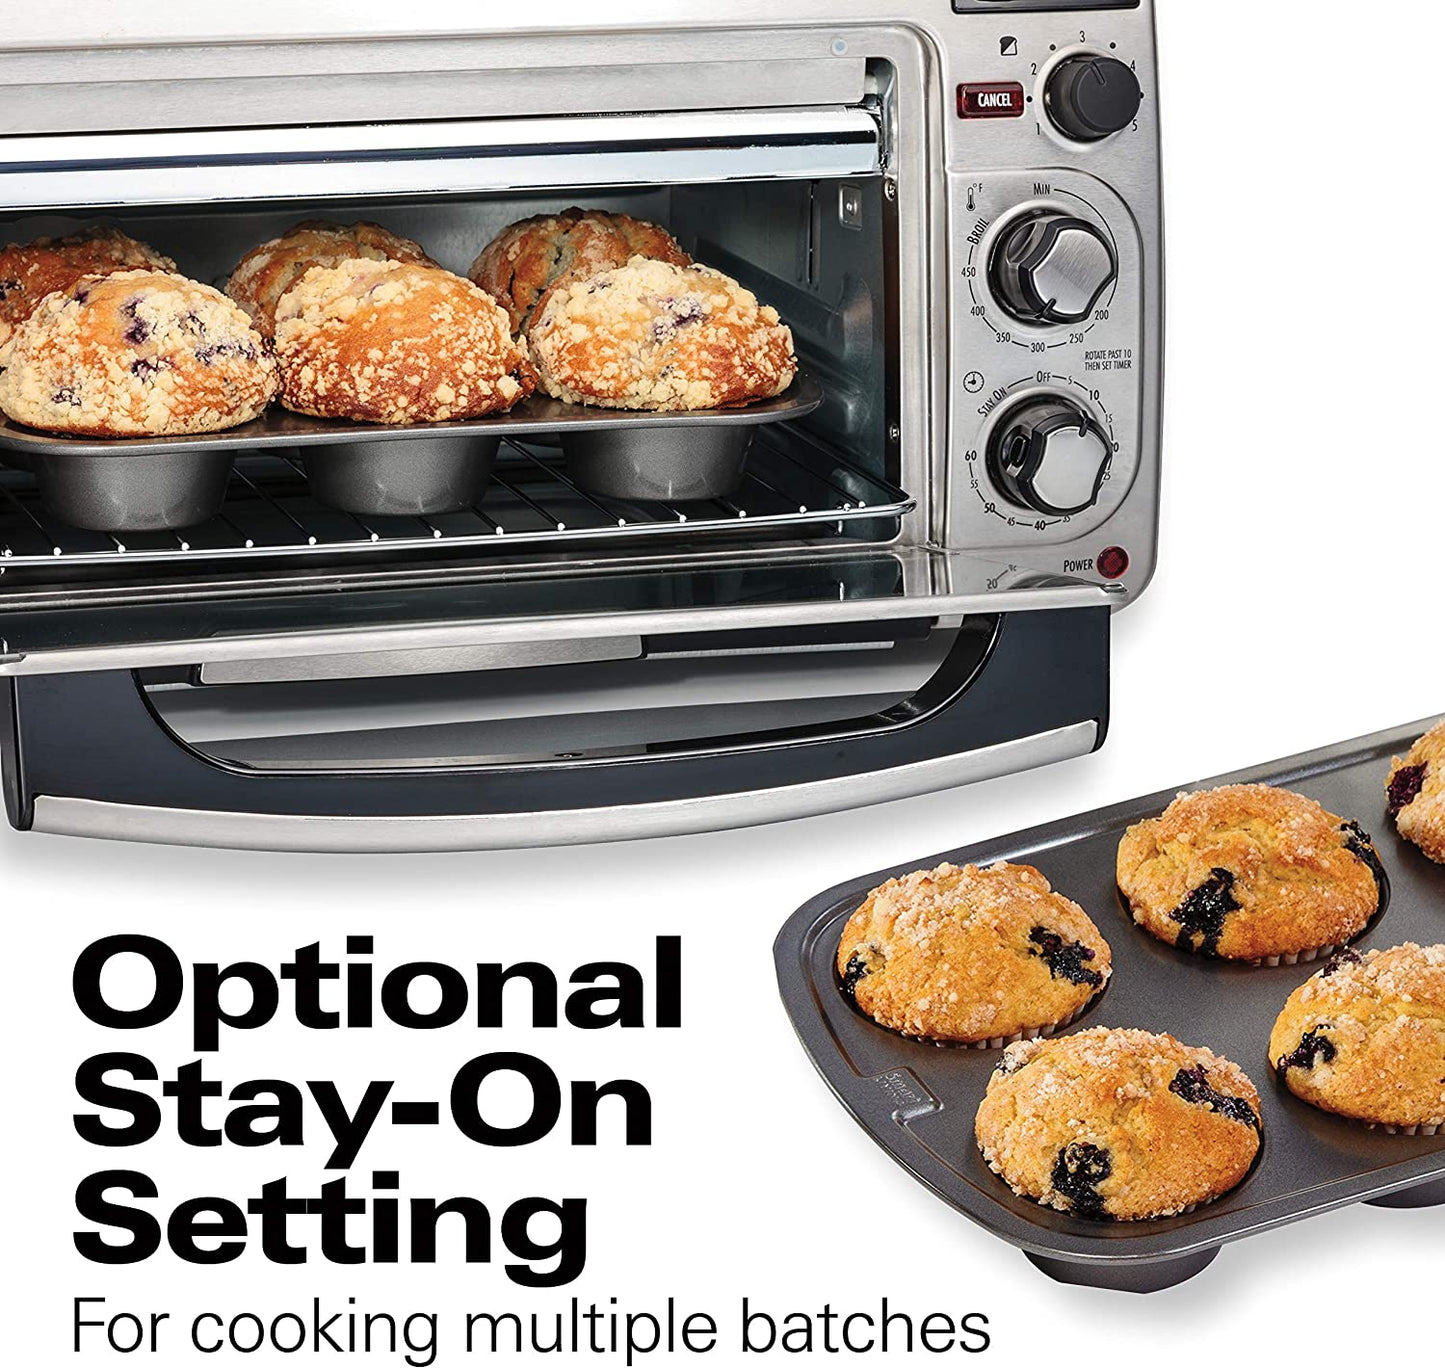 Multifunctional Stainless Steel Countertop Toaster Oven with Long Slot 2 Slice Toaster, 60 Minute Timer, Automatic Shut Off, and Shade Selector